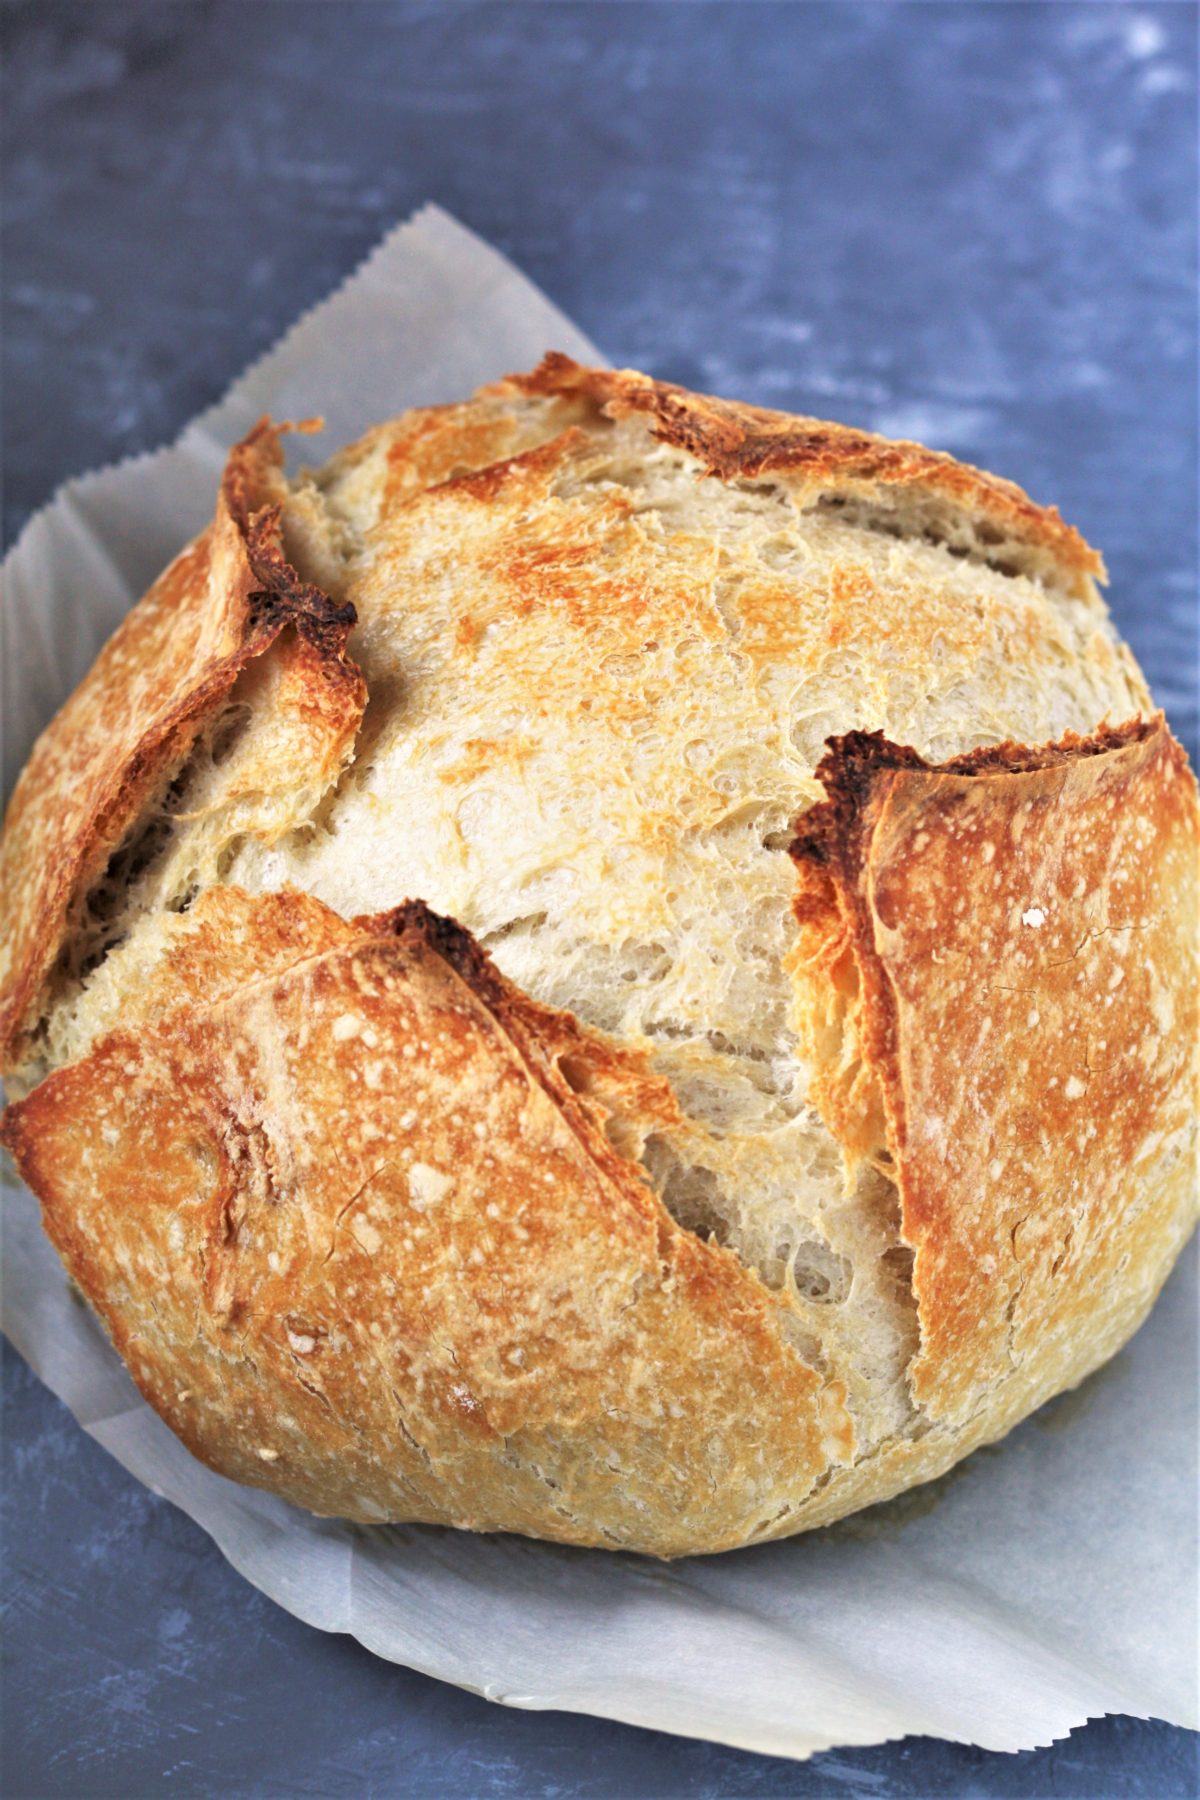 This easiest no knead bread recipe requires just FOUR basic ingredients and results in a perfectly crusty, golden artisan-style loaf with amazing chewy texture - either with an overnight method or a fast rise method!